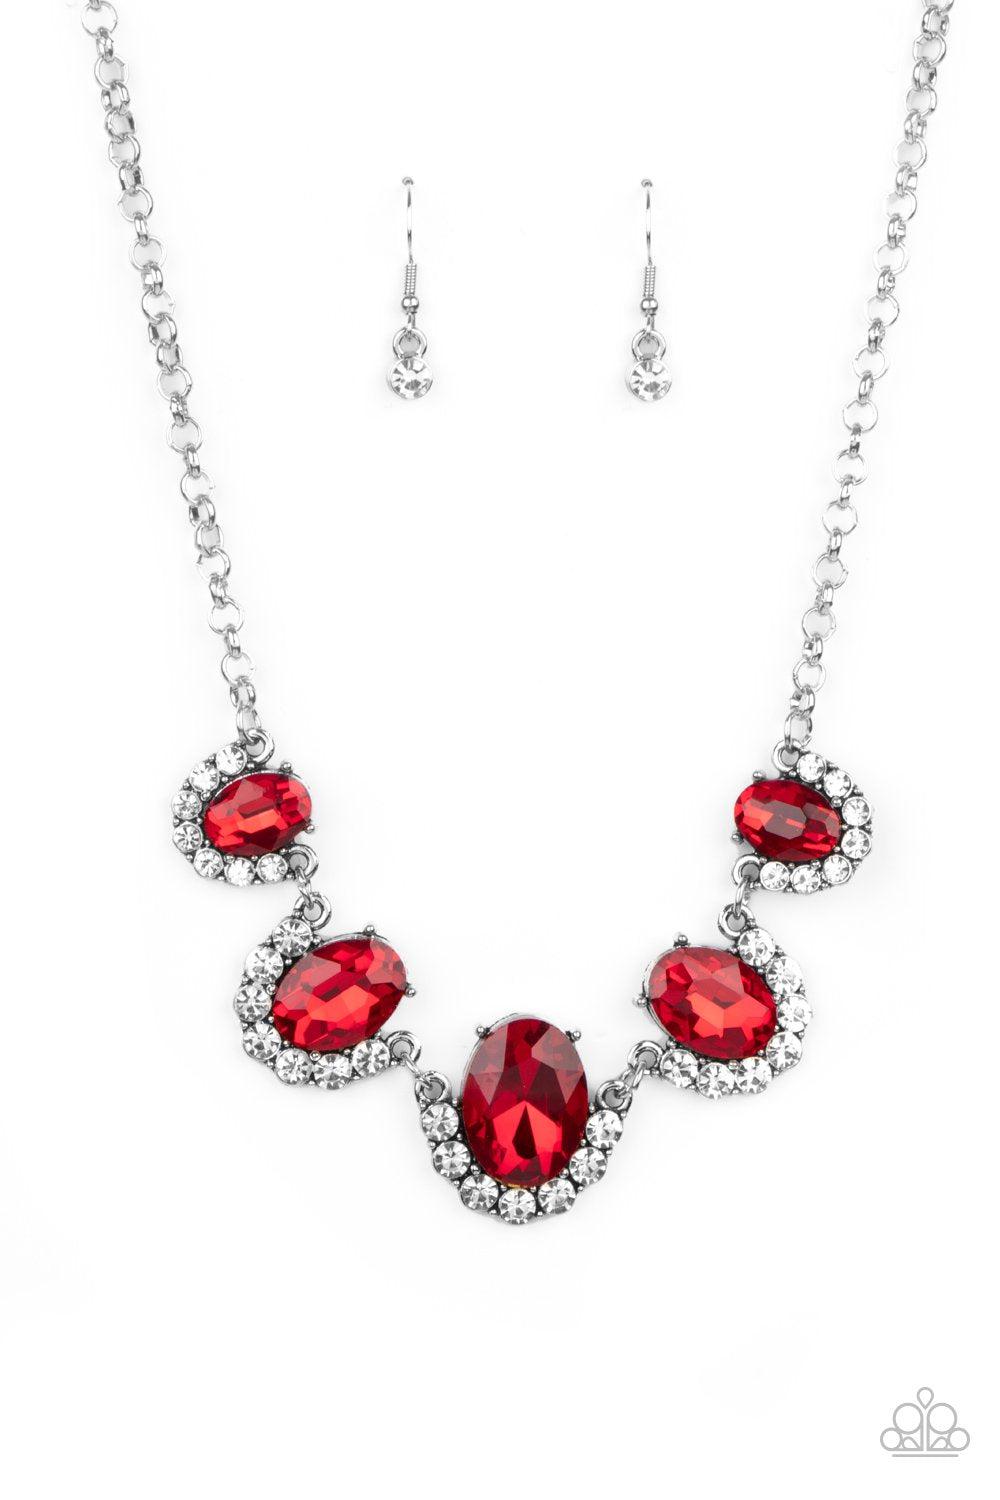 The Queen Demands It Red and White Rhinestone Necklace - Paparazzi Accessories- lightbox - CarasShop.com - $5 Jewelry by Cara Jewels